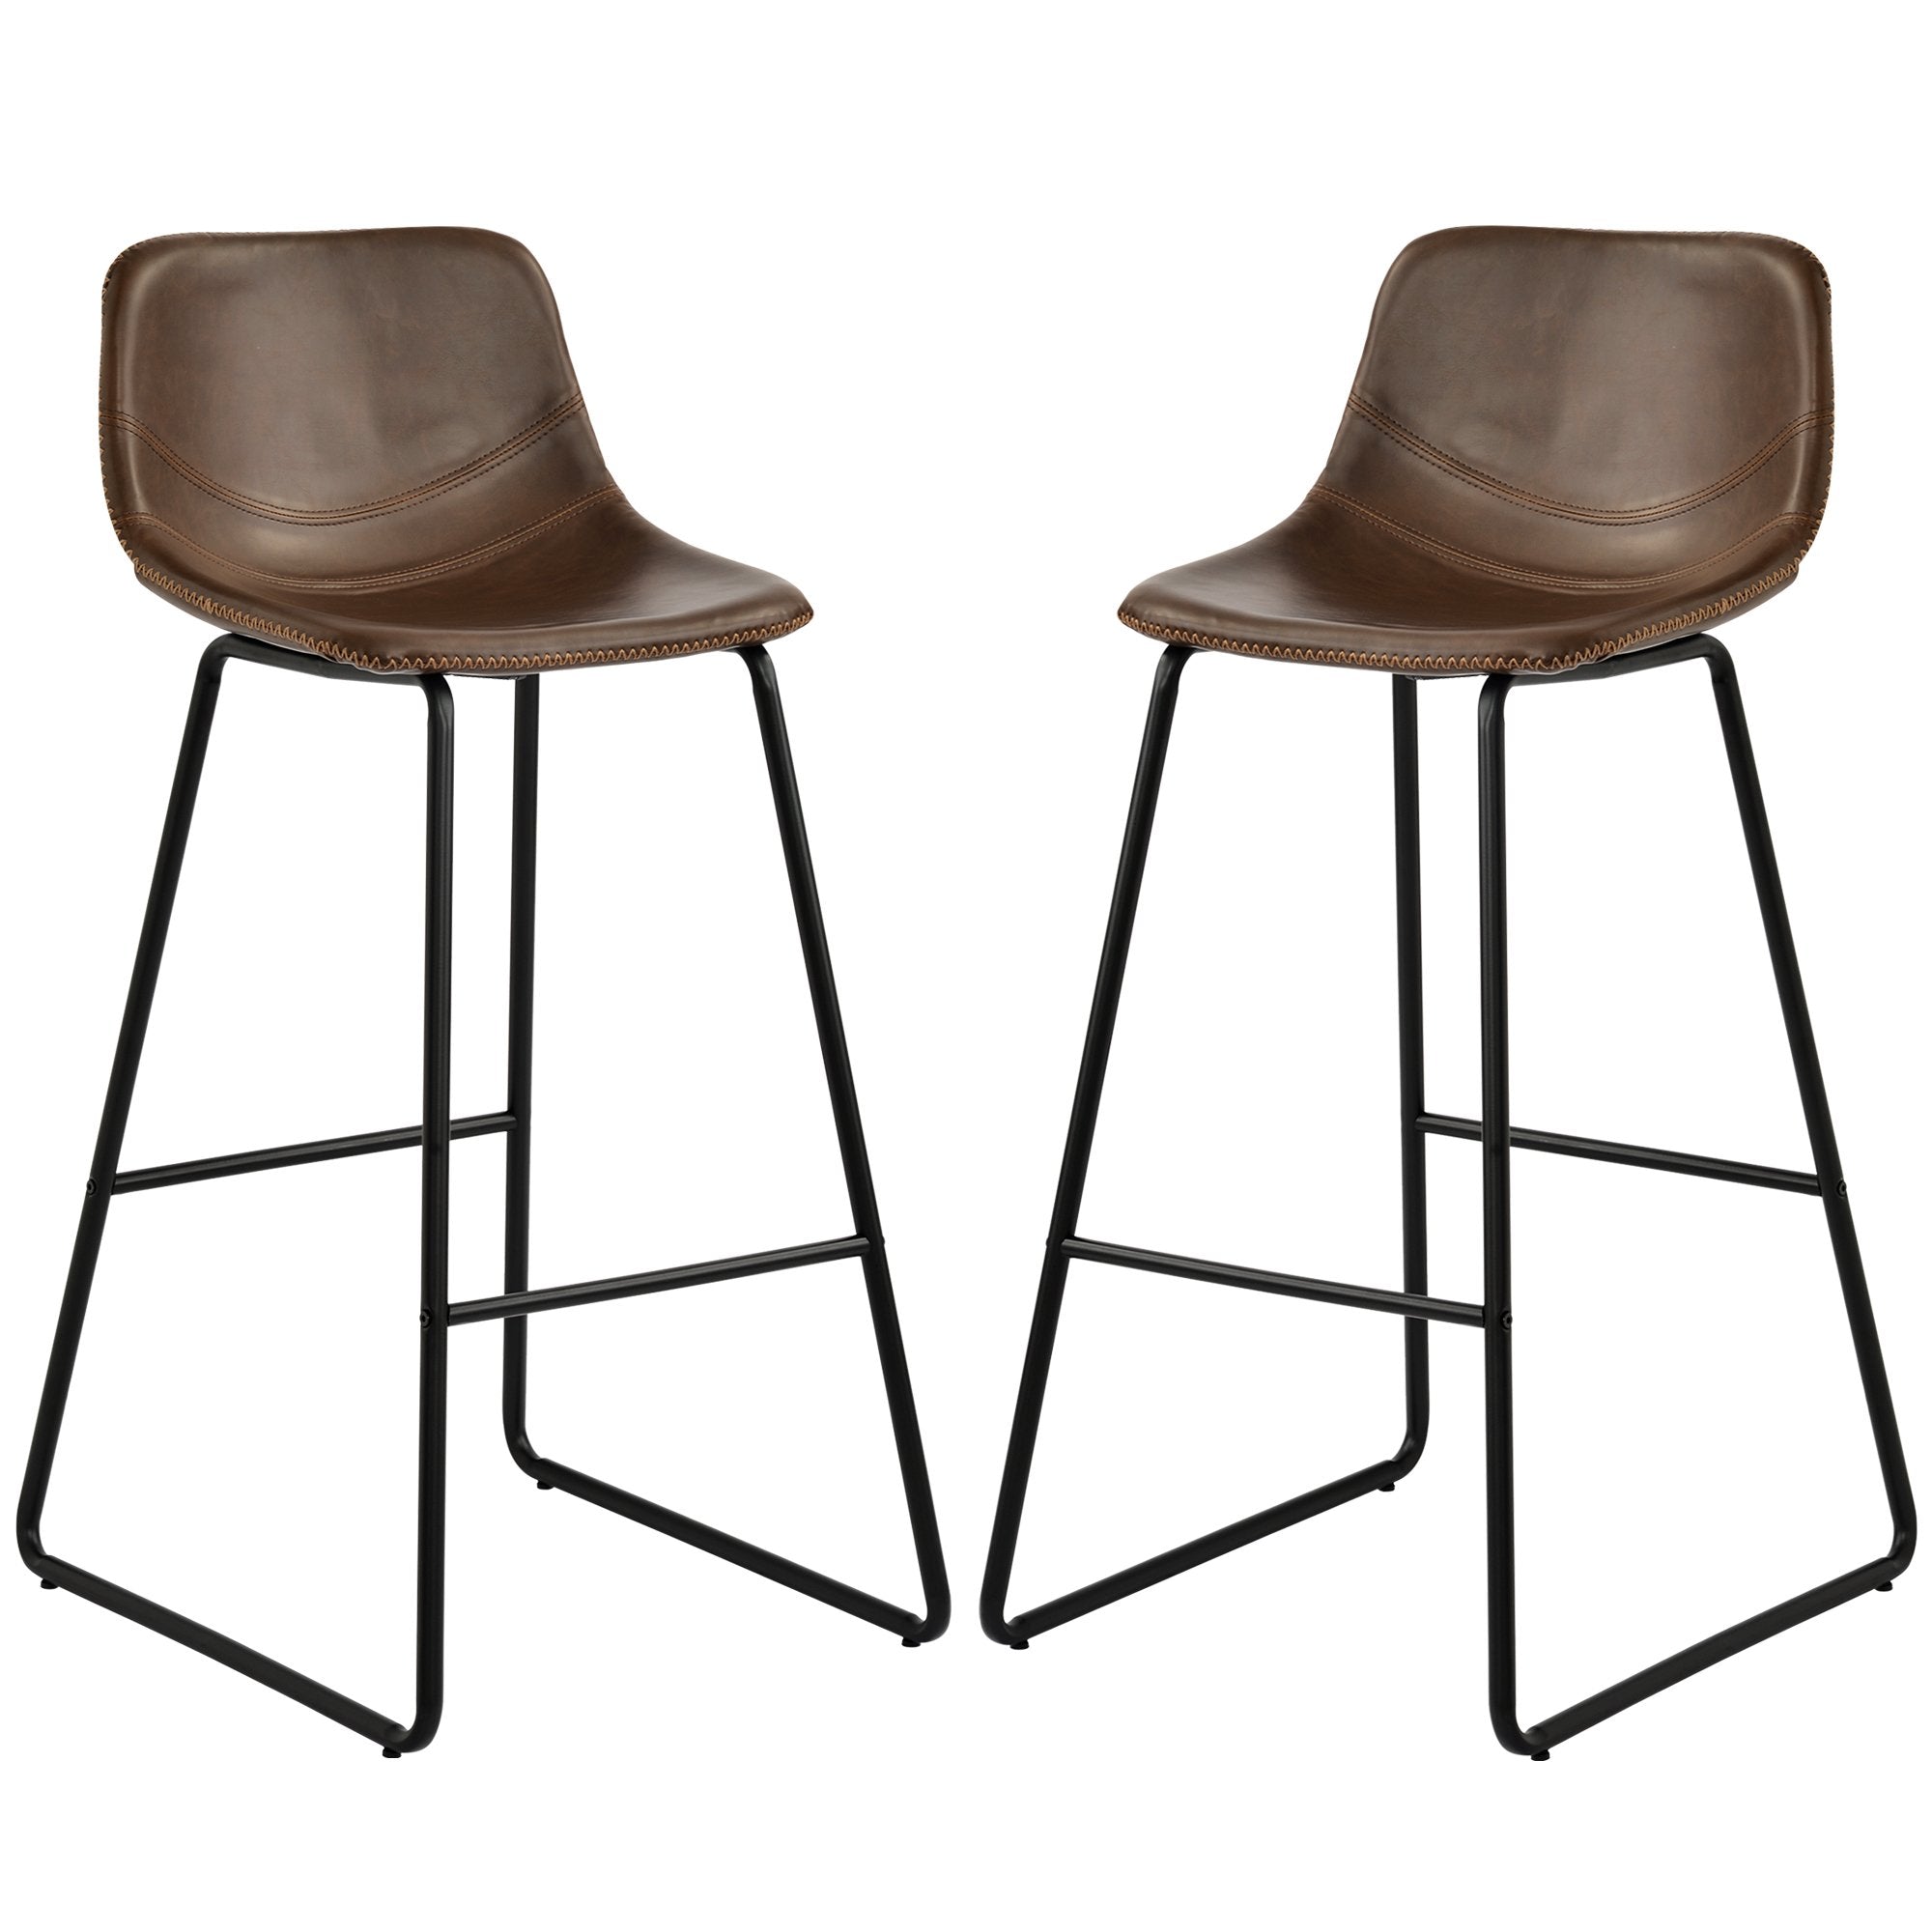 Low Back Footrest Vintage Leatherier Height Bar Stools Dining Chairs Set of 2